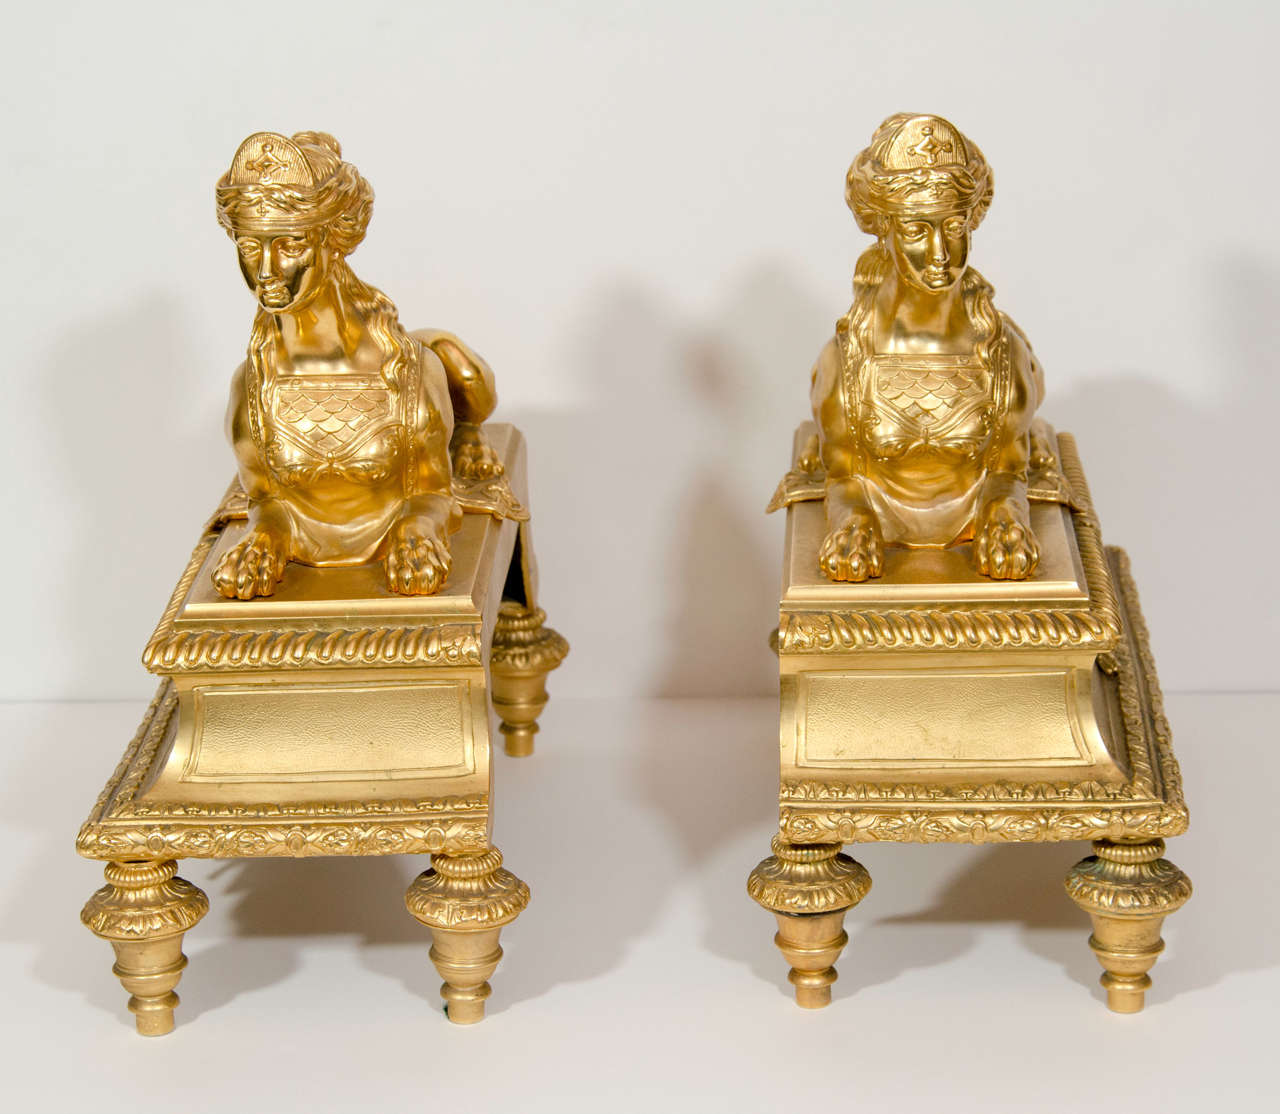 A Pair of fine Antique French Louis XVI Style gilt bronze chenets with figures of sphinxes, 19th century.